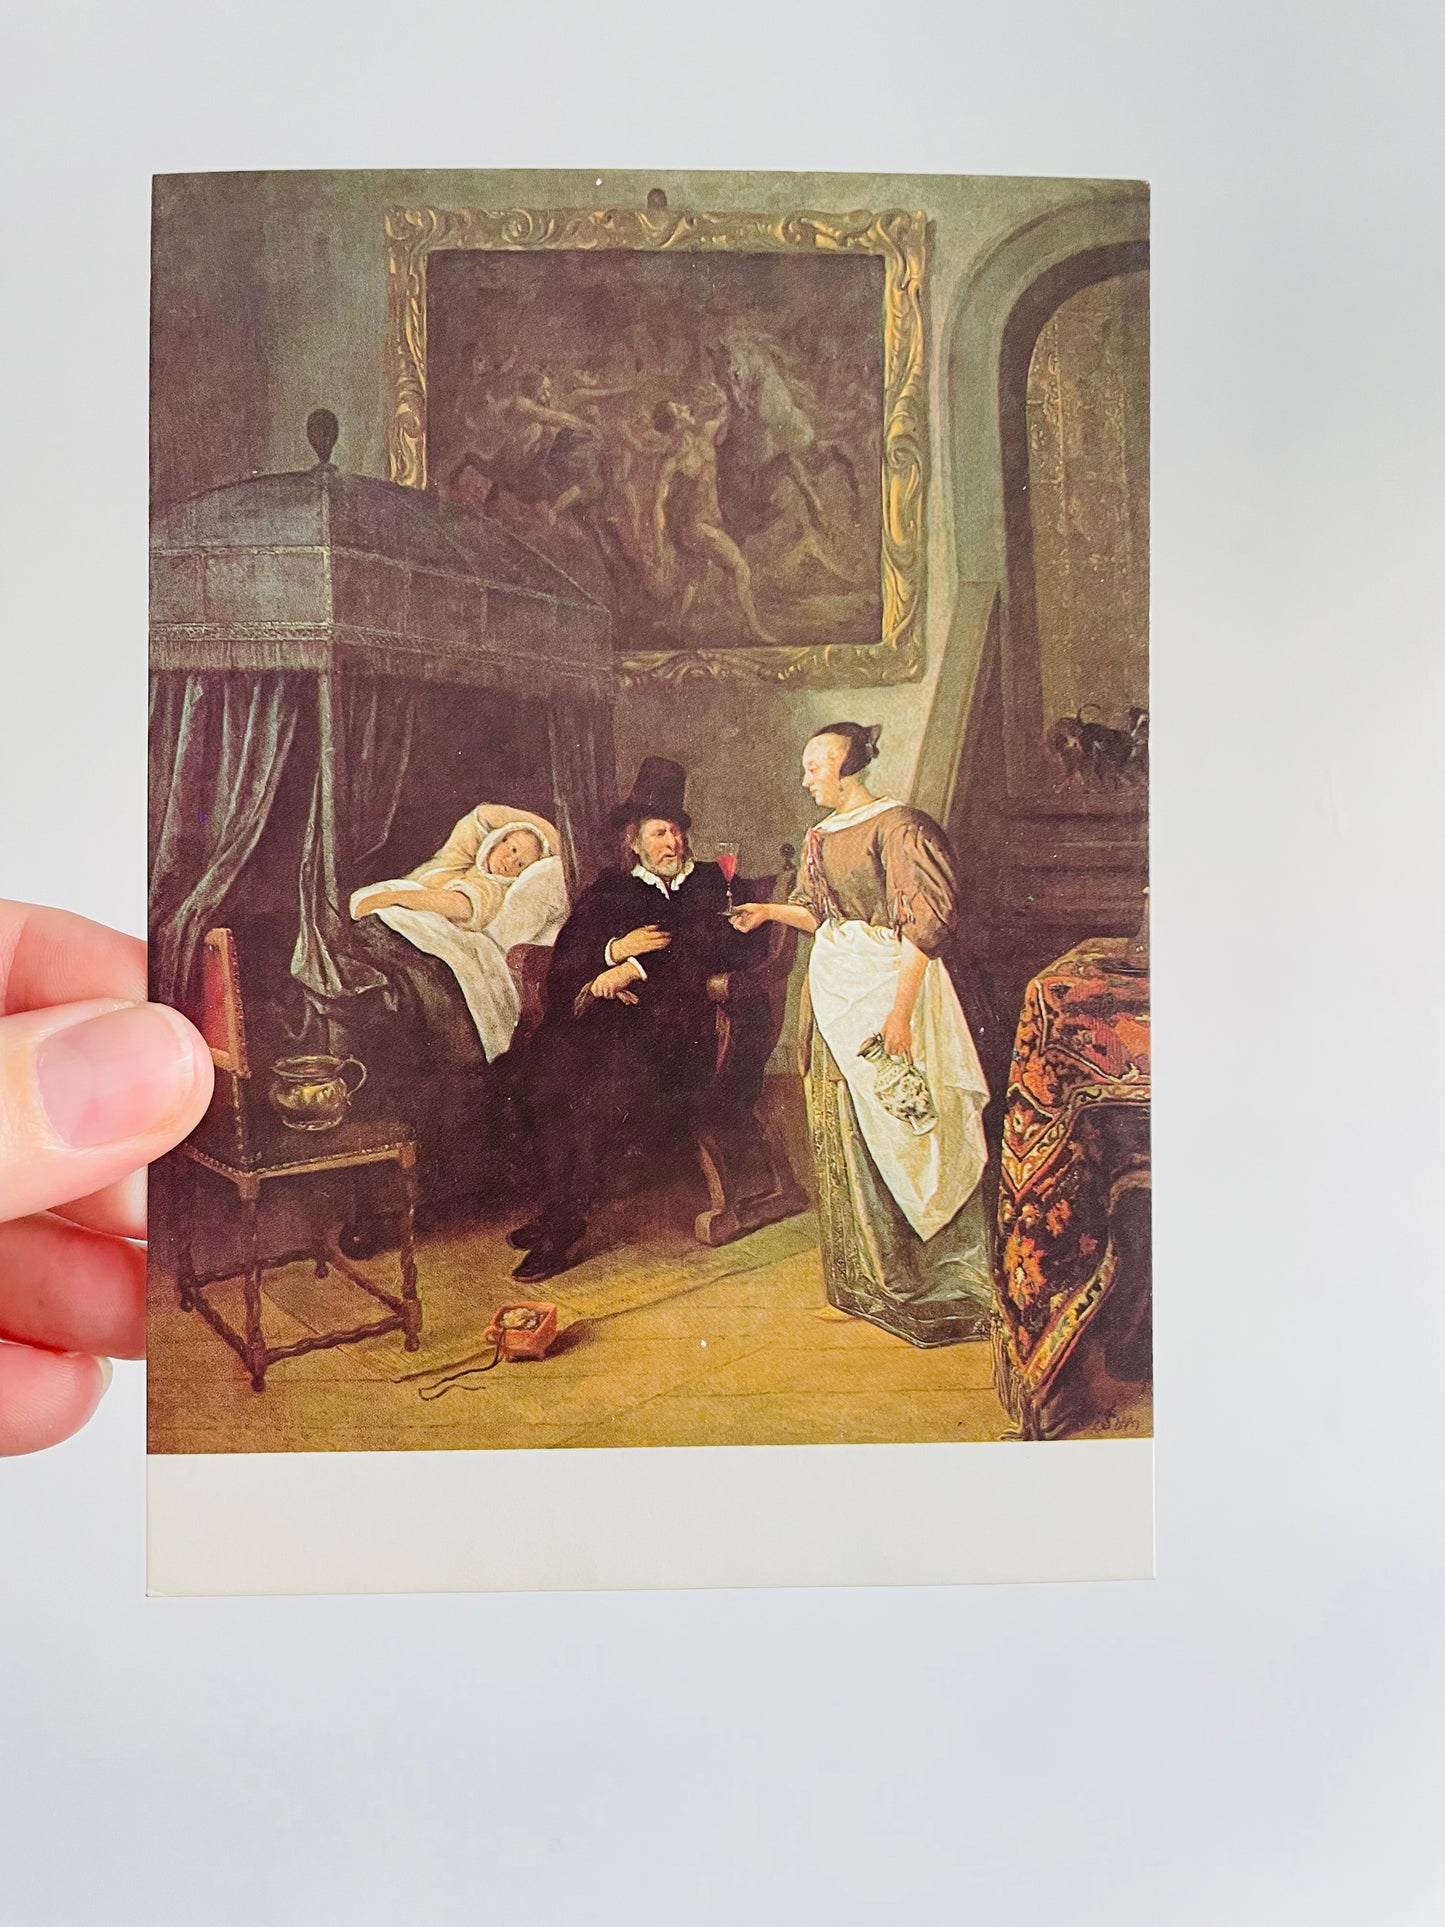 Jan Steen 'The Doctor's Visit' Postcard #2 - 1982 Printed in England - 4" by 6"